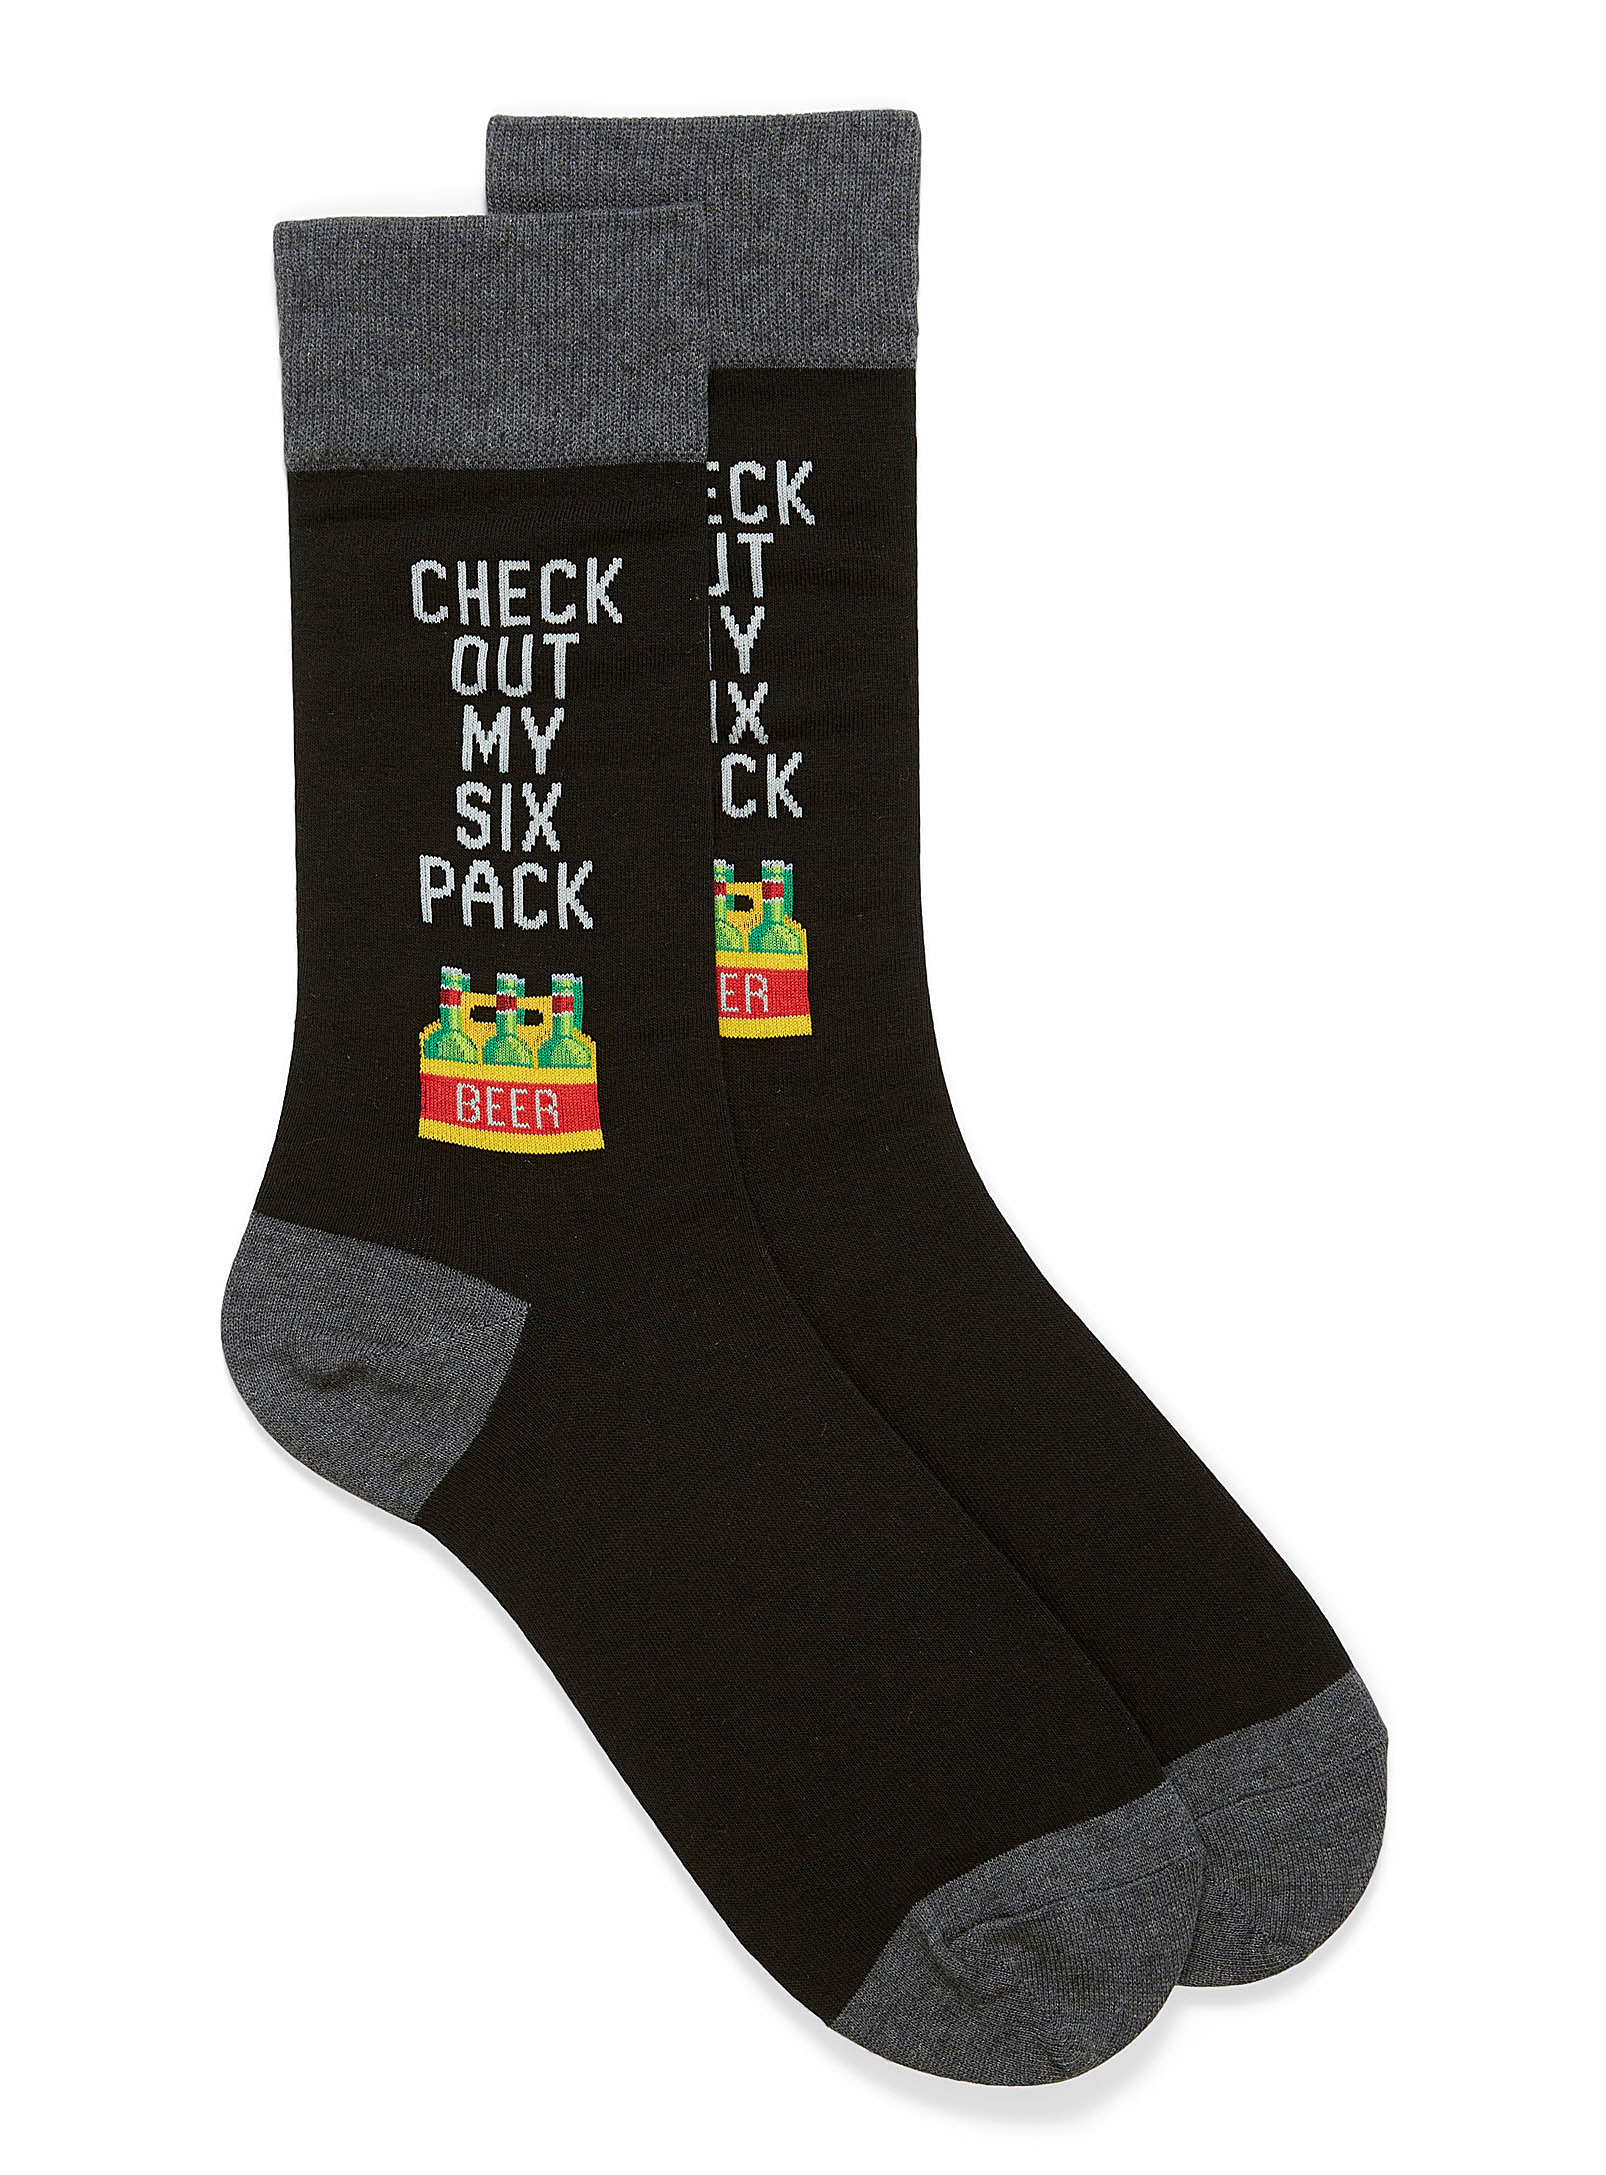 Hot Sox - Men's Check Out My Six-Pack socks